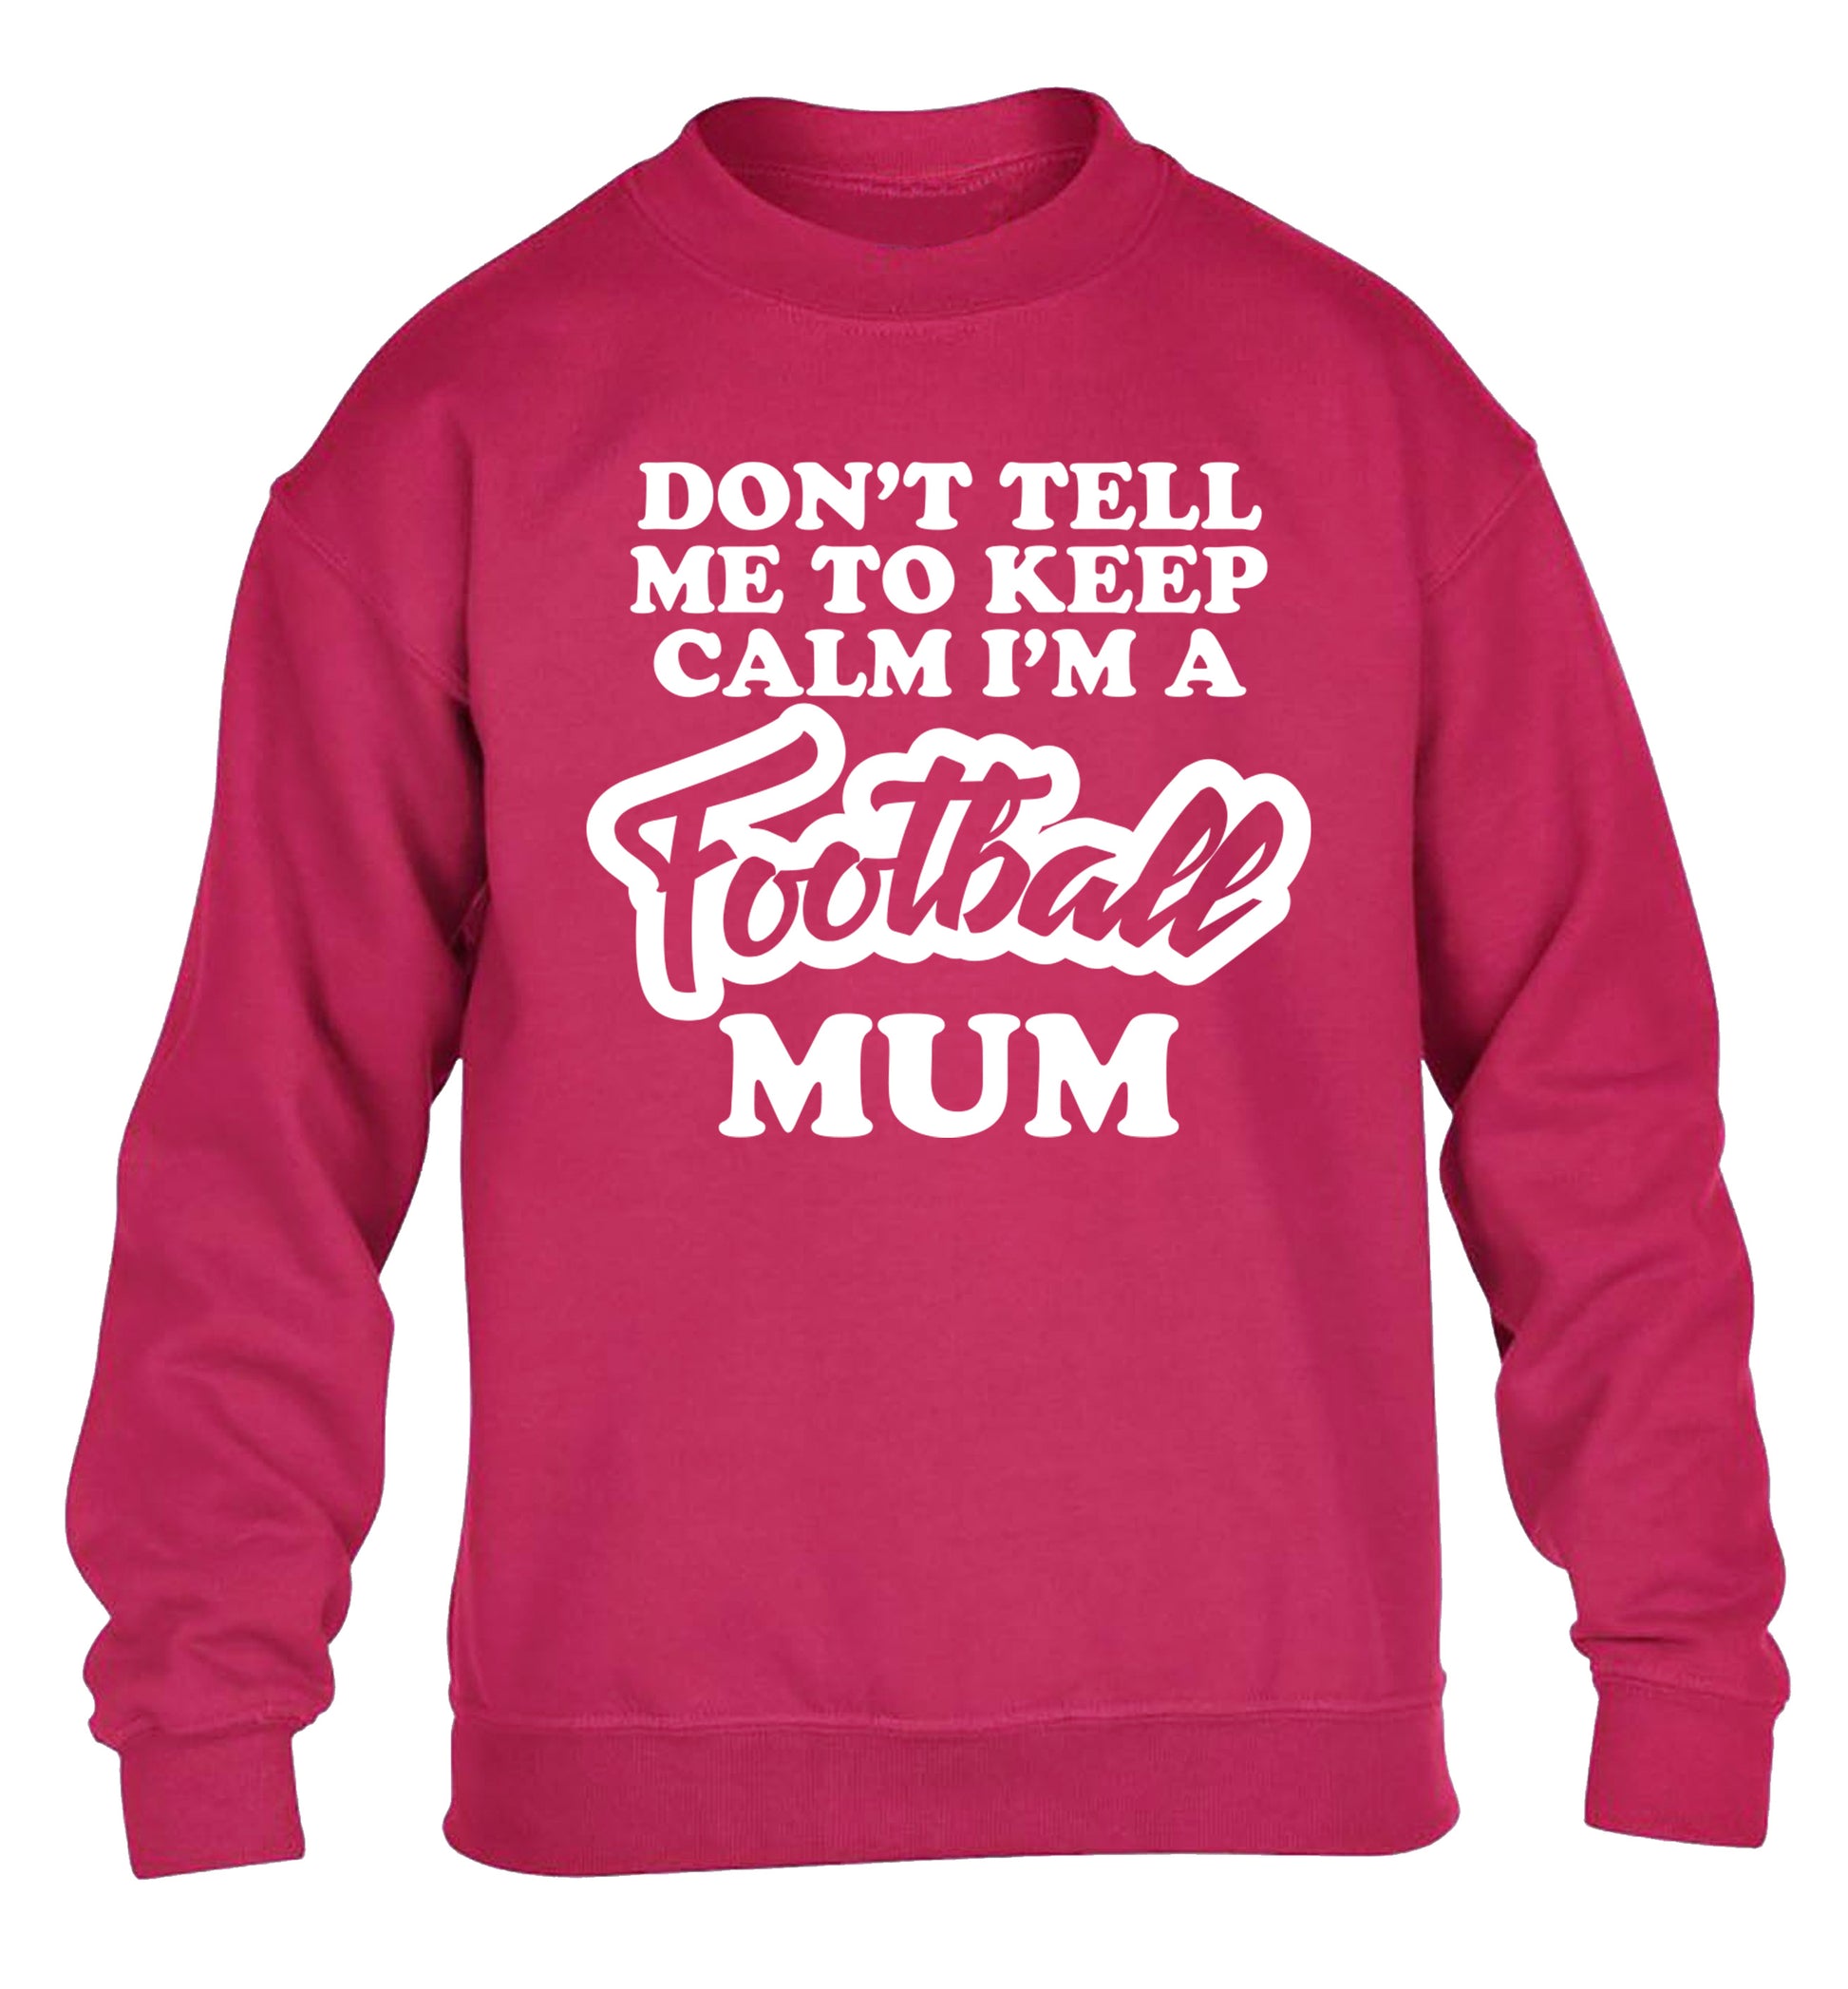 Don't tell me to keep calm I'm a football mum children's pink sweater 12-14 Years